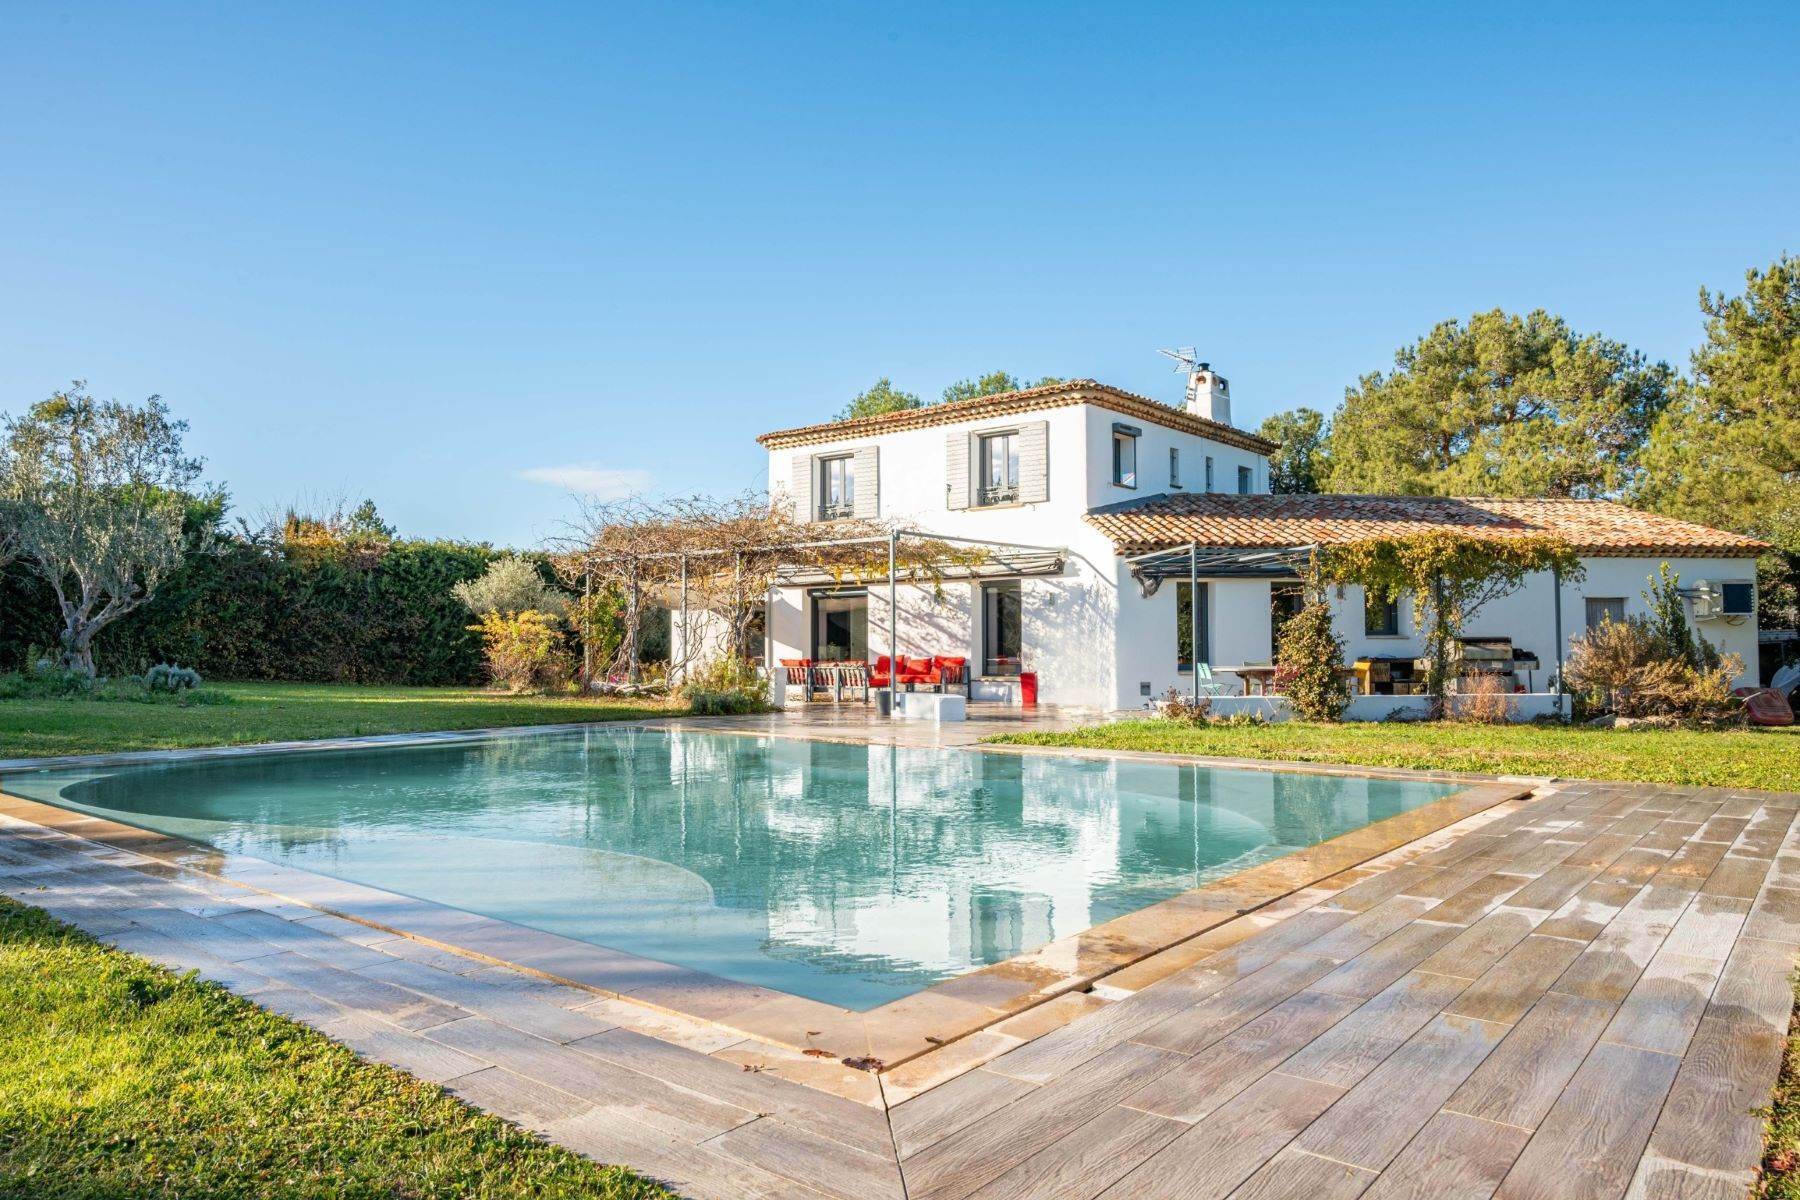 Single Family Homes for Sale at Family house 210 m² - 3200 m² - for sale near AIX EN PROVENCE Aix-En-Provence, Provence-Alpes-Cote D'Azur 13100 France